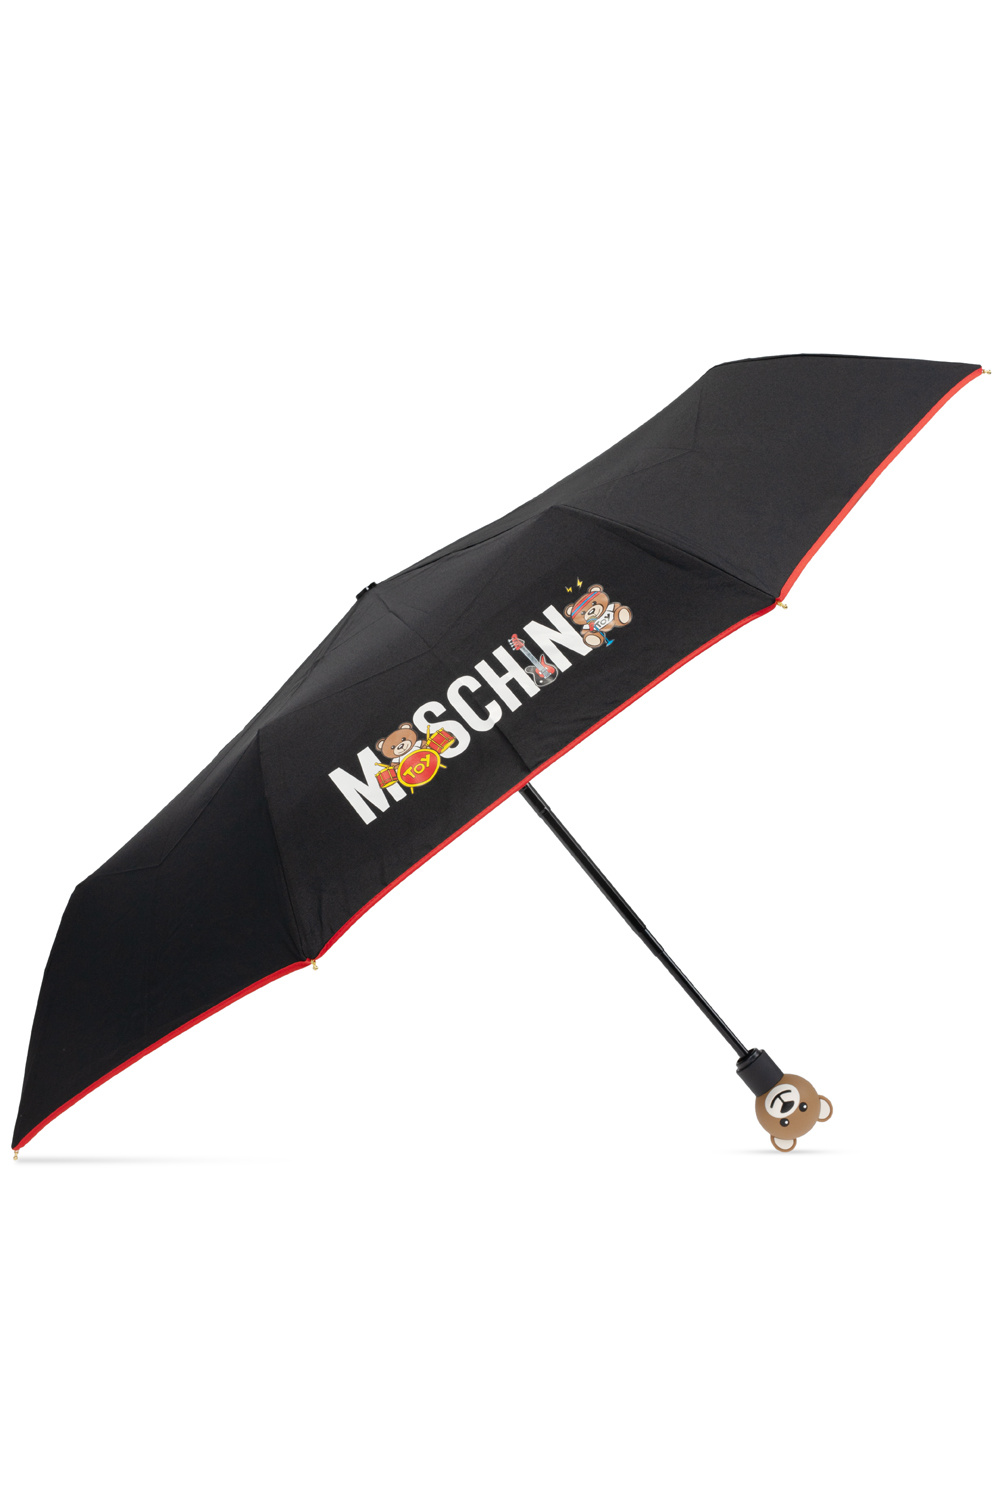 Moschino Recommended for you